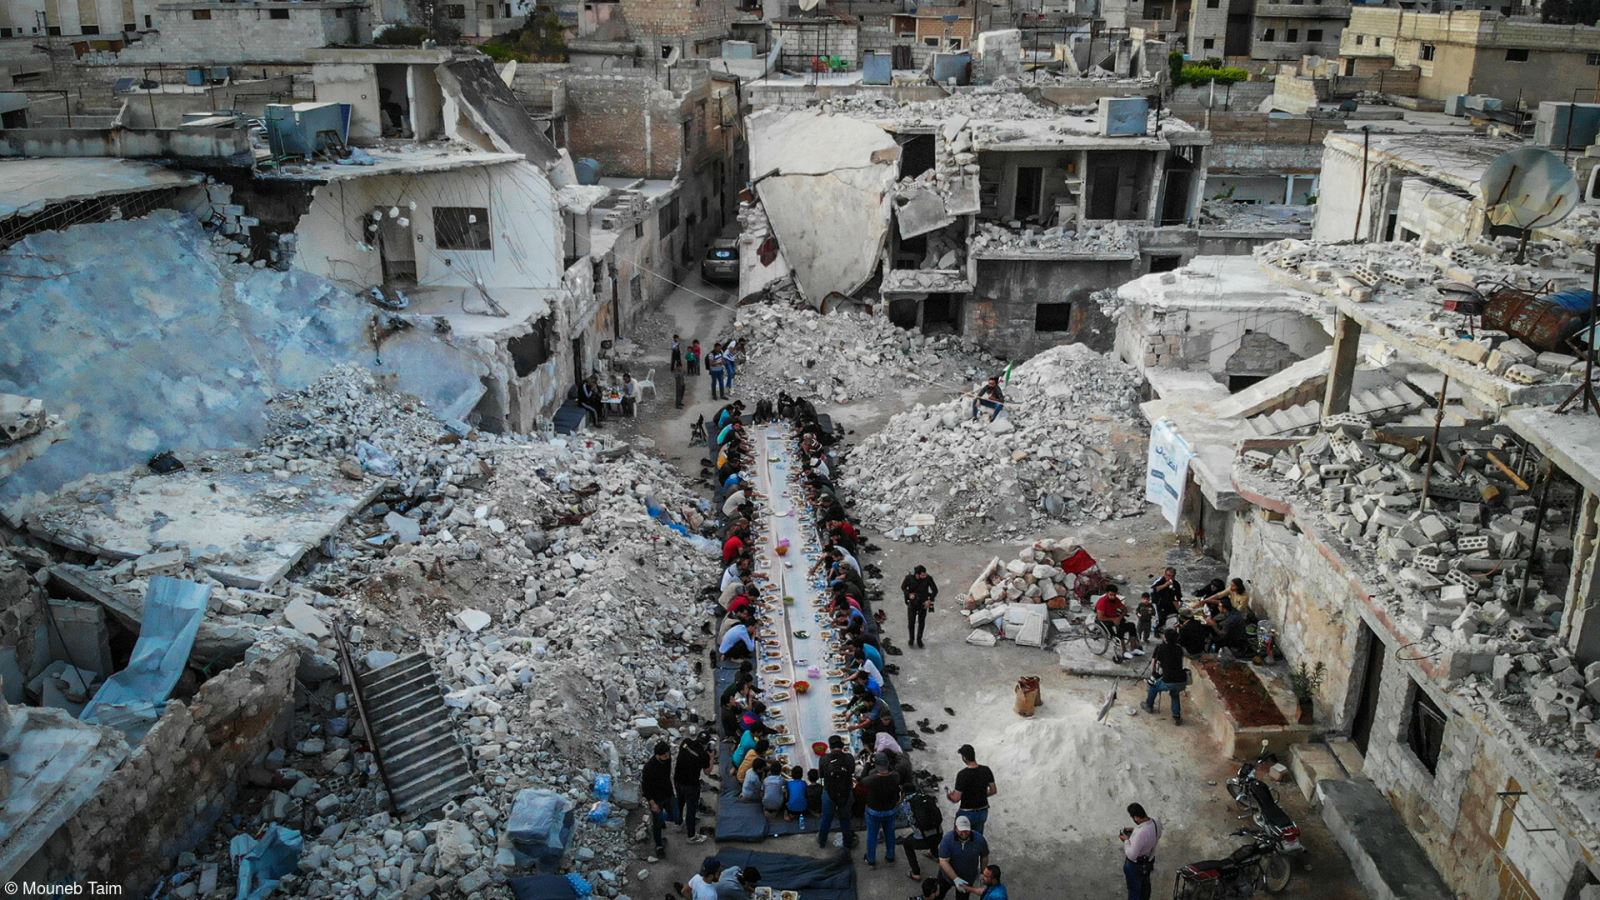 ‘Ramadan Meals Among the Ruins in Idlib, Syria’ by Syrian photographer, Mouneb Taim, won the Politics of Food category. The image captures a group holding breakfast during Ramadan amongst the rubble left after the Syrian regime’s campaign on Idlib.